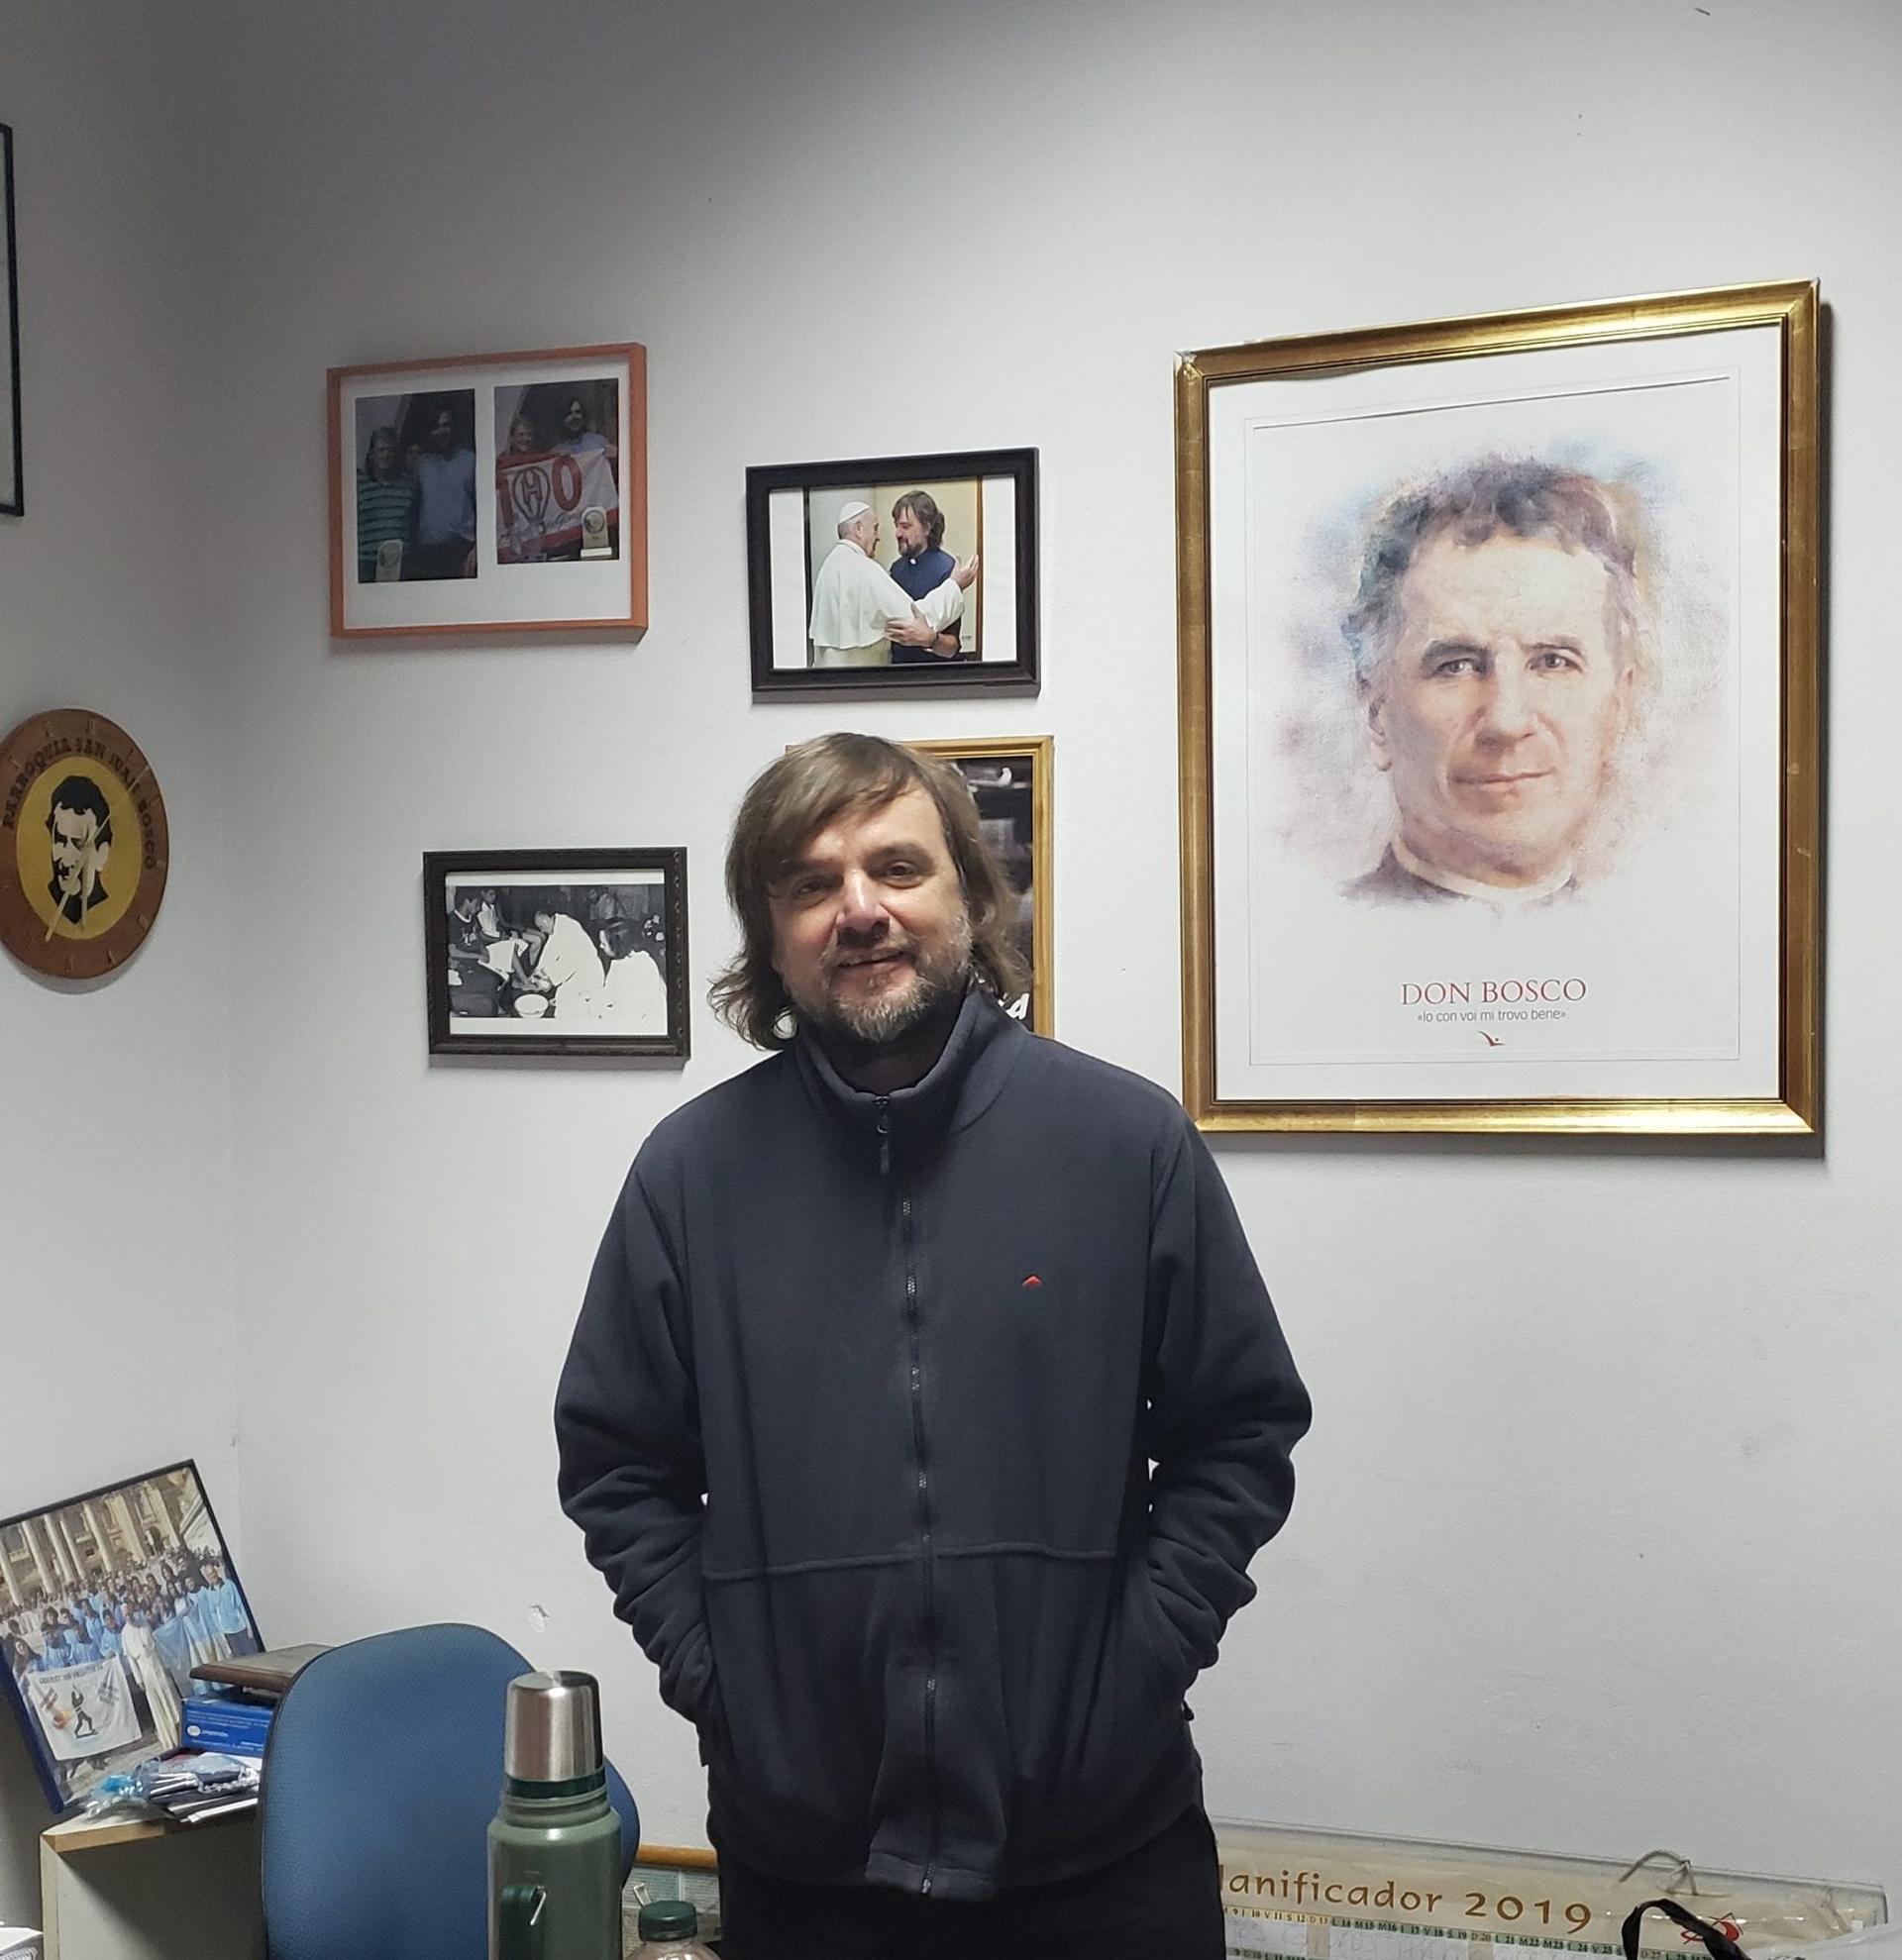 Argentinian ‘slum priest’ says he’s close to the pope, but not in contact